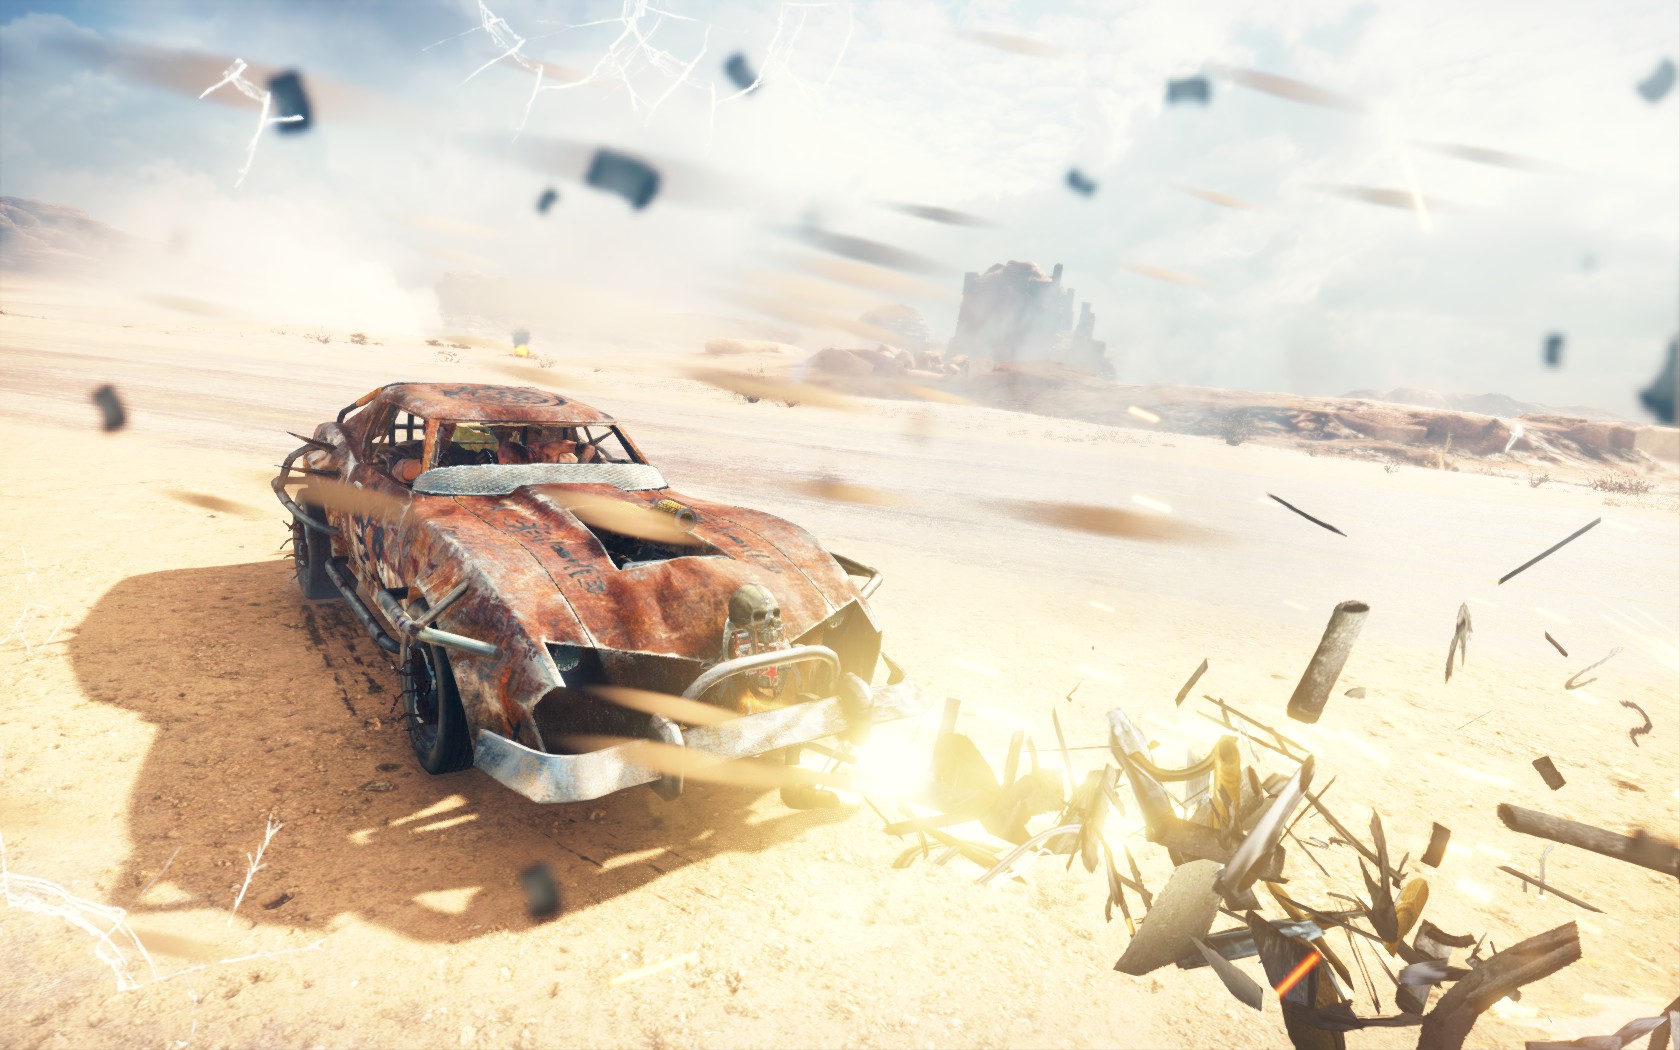 Mad Max Art by HydroMagnetic